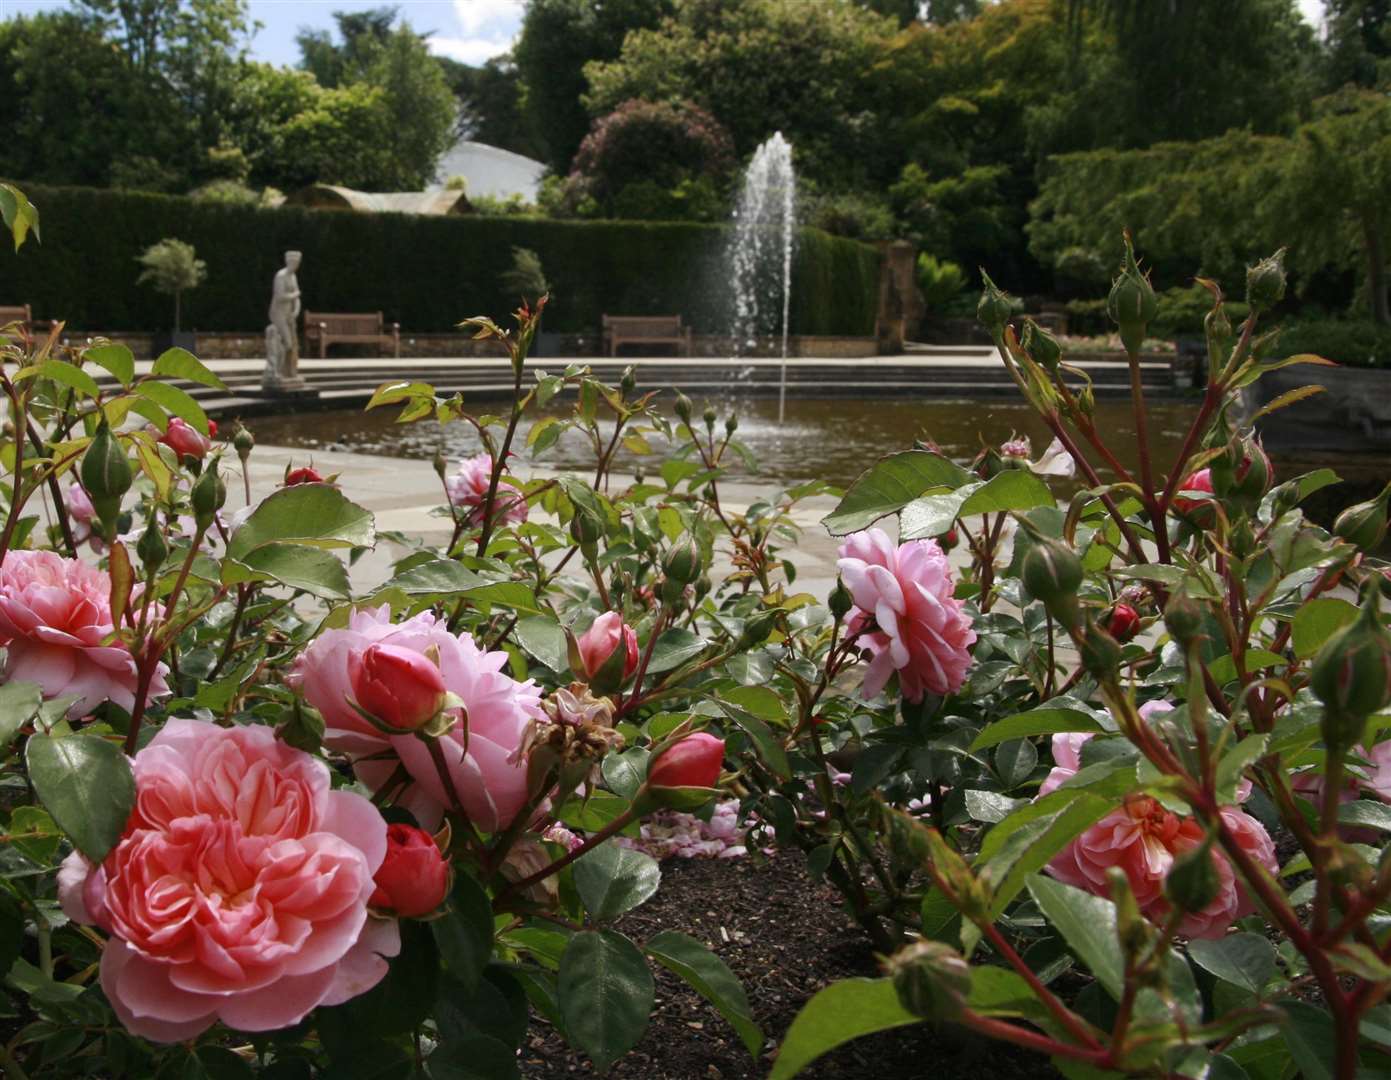 Explore the gardens during Hever In Bloom